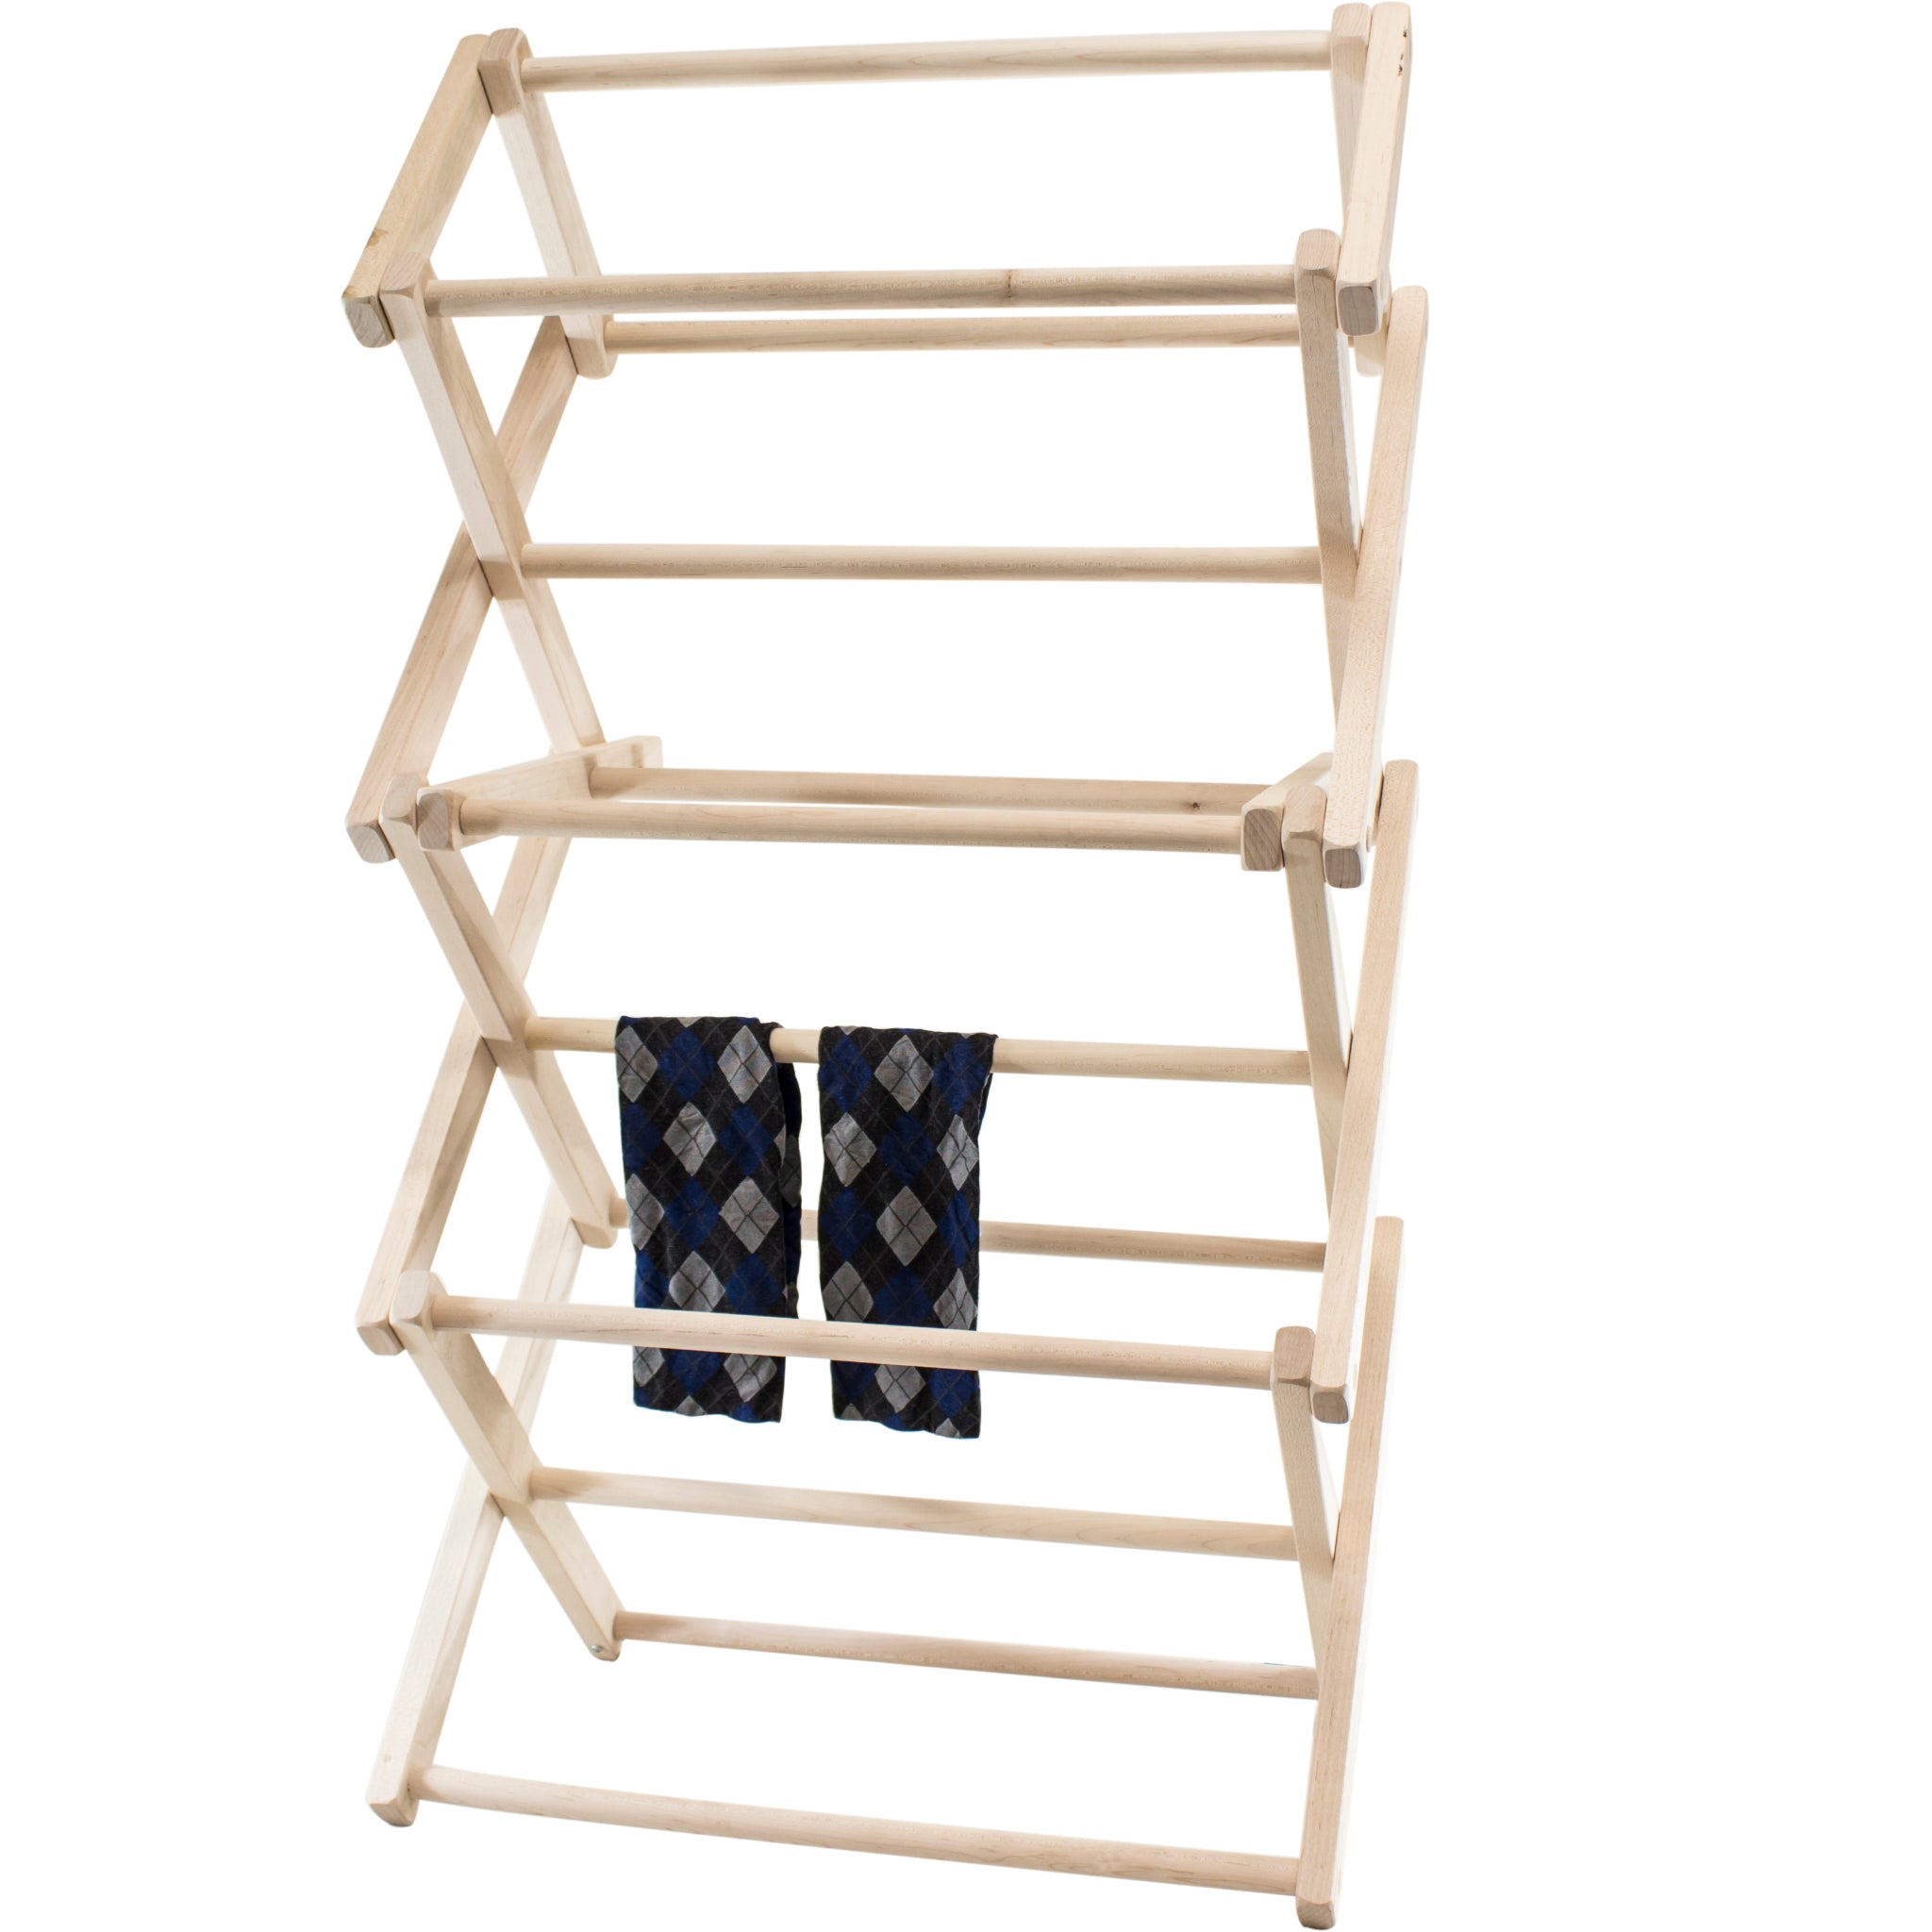 Pennsylvania Woodworks Clothes Drying Rack (Made in The Usa) Heavy Duty 100% Hardwood (Medium)